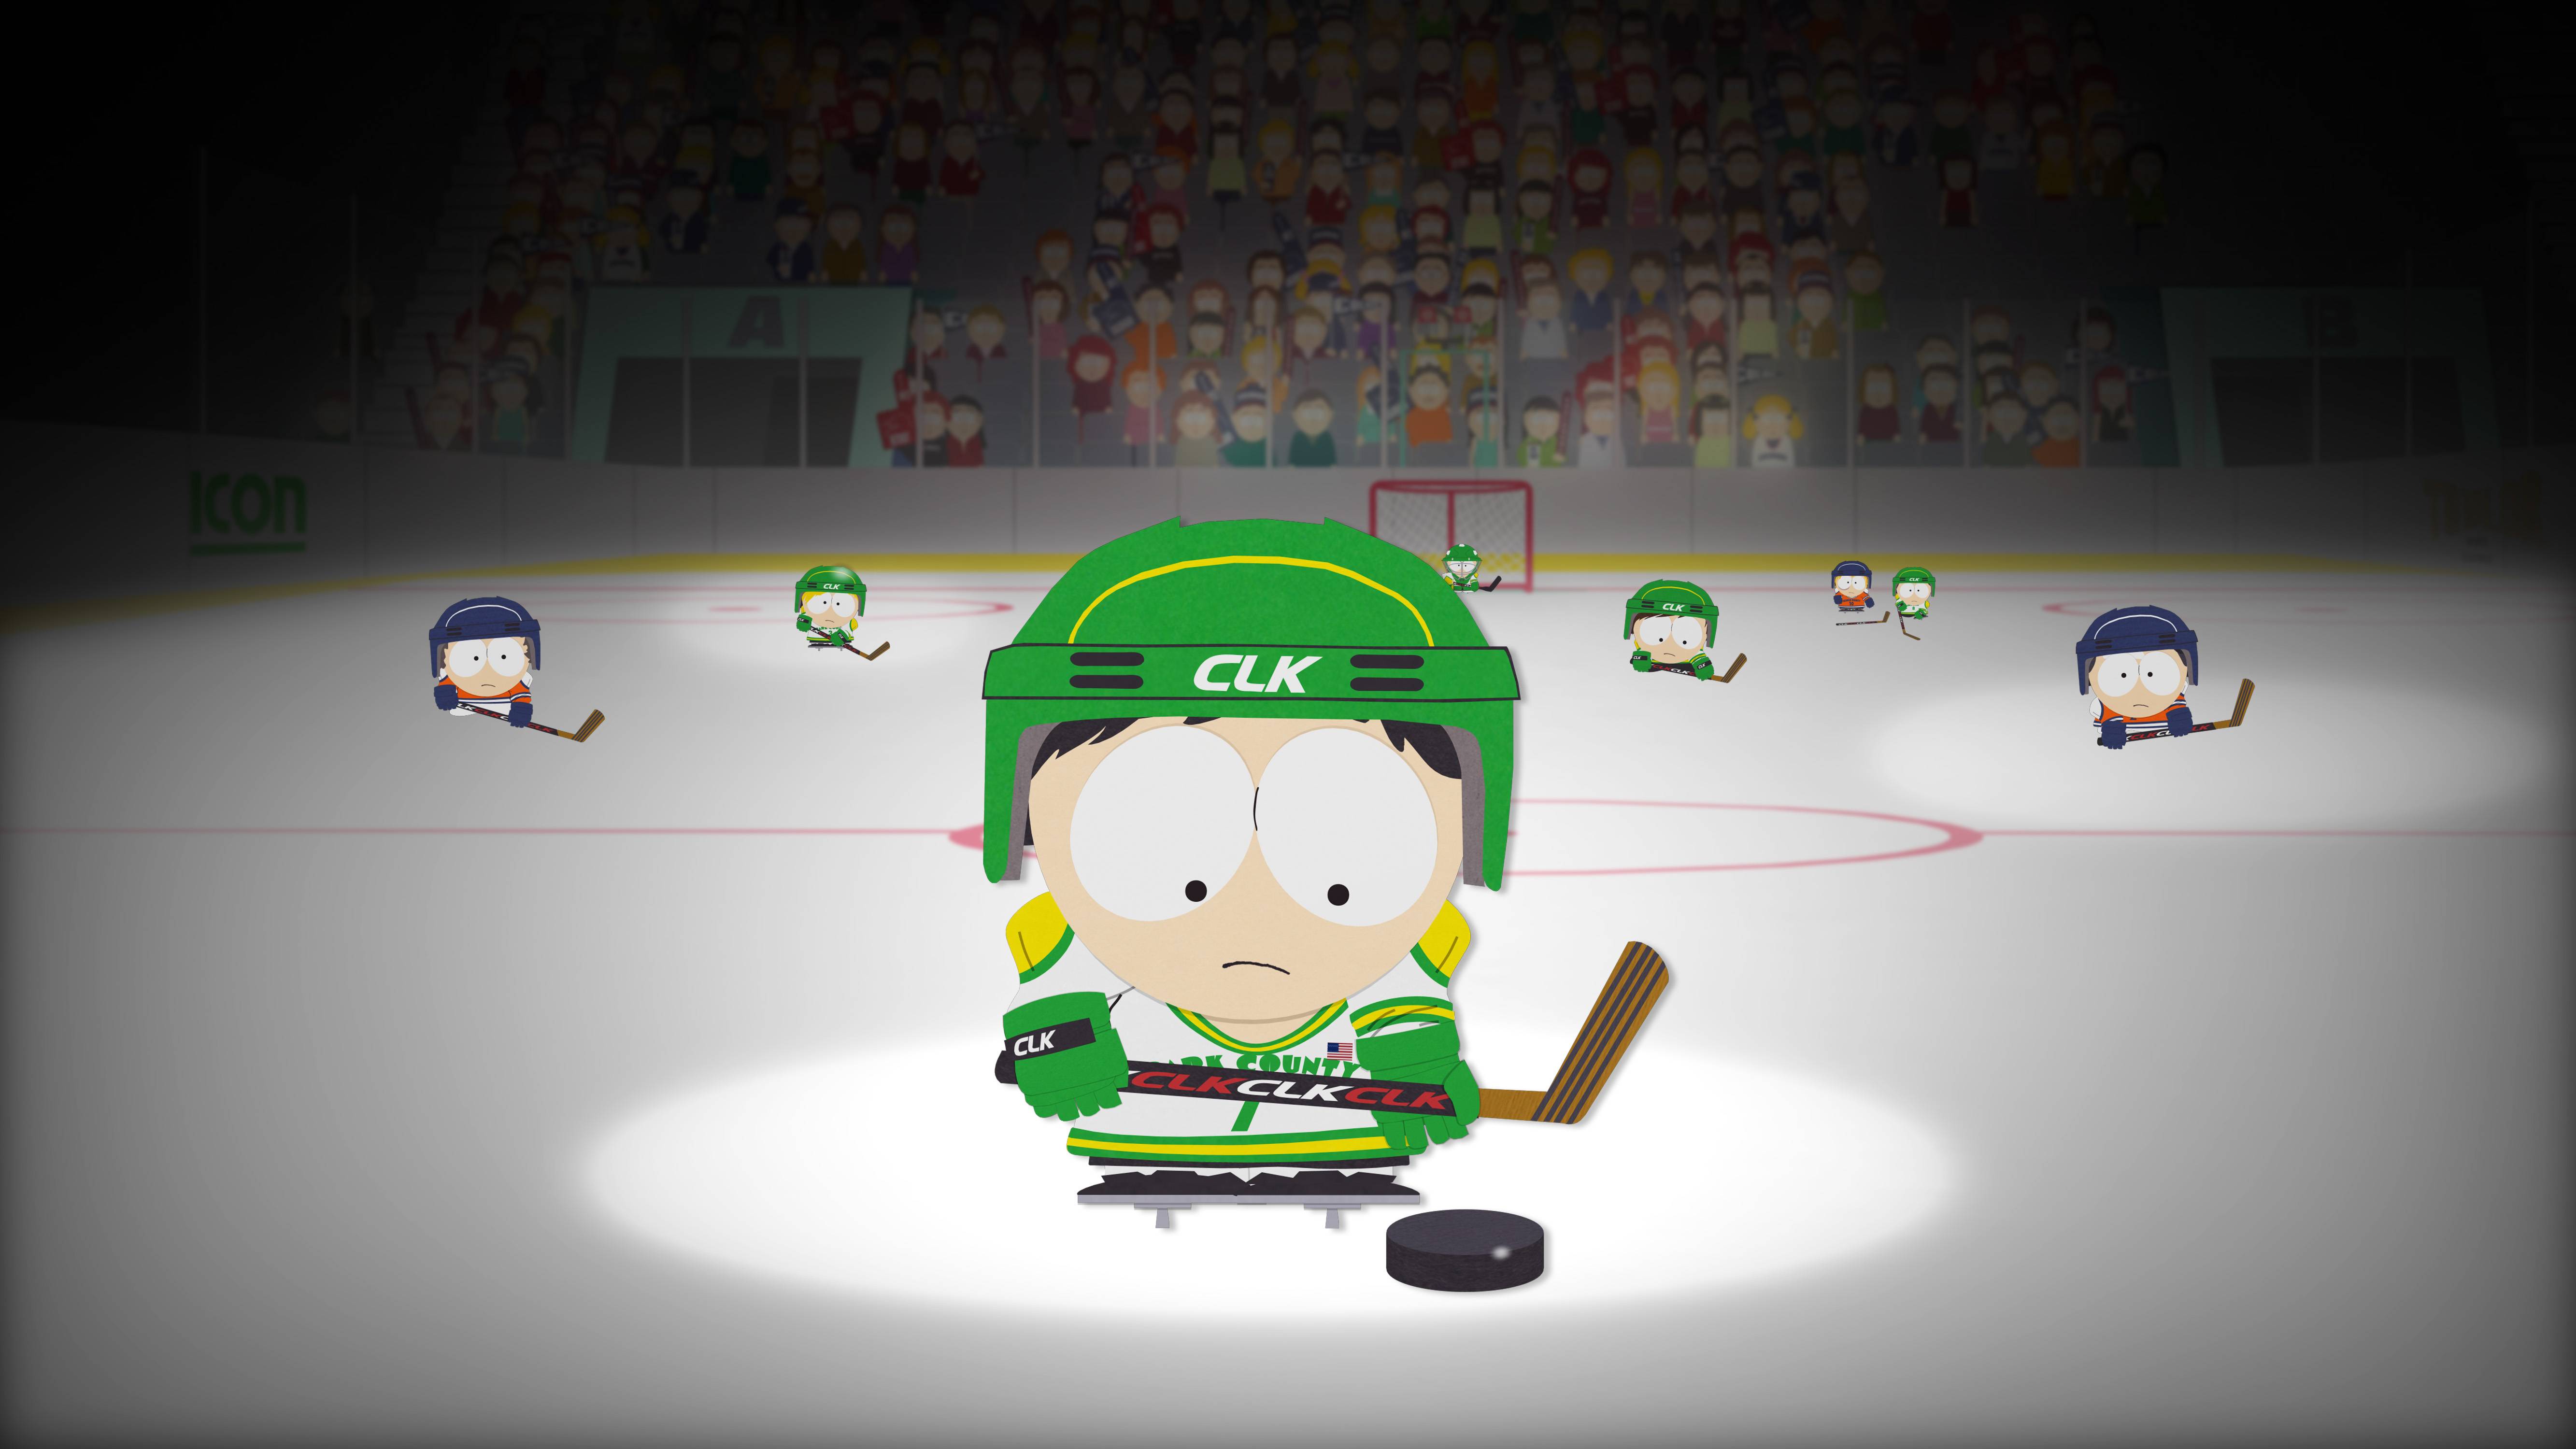 Stanley's Cup, South Park Archives